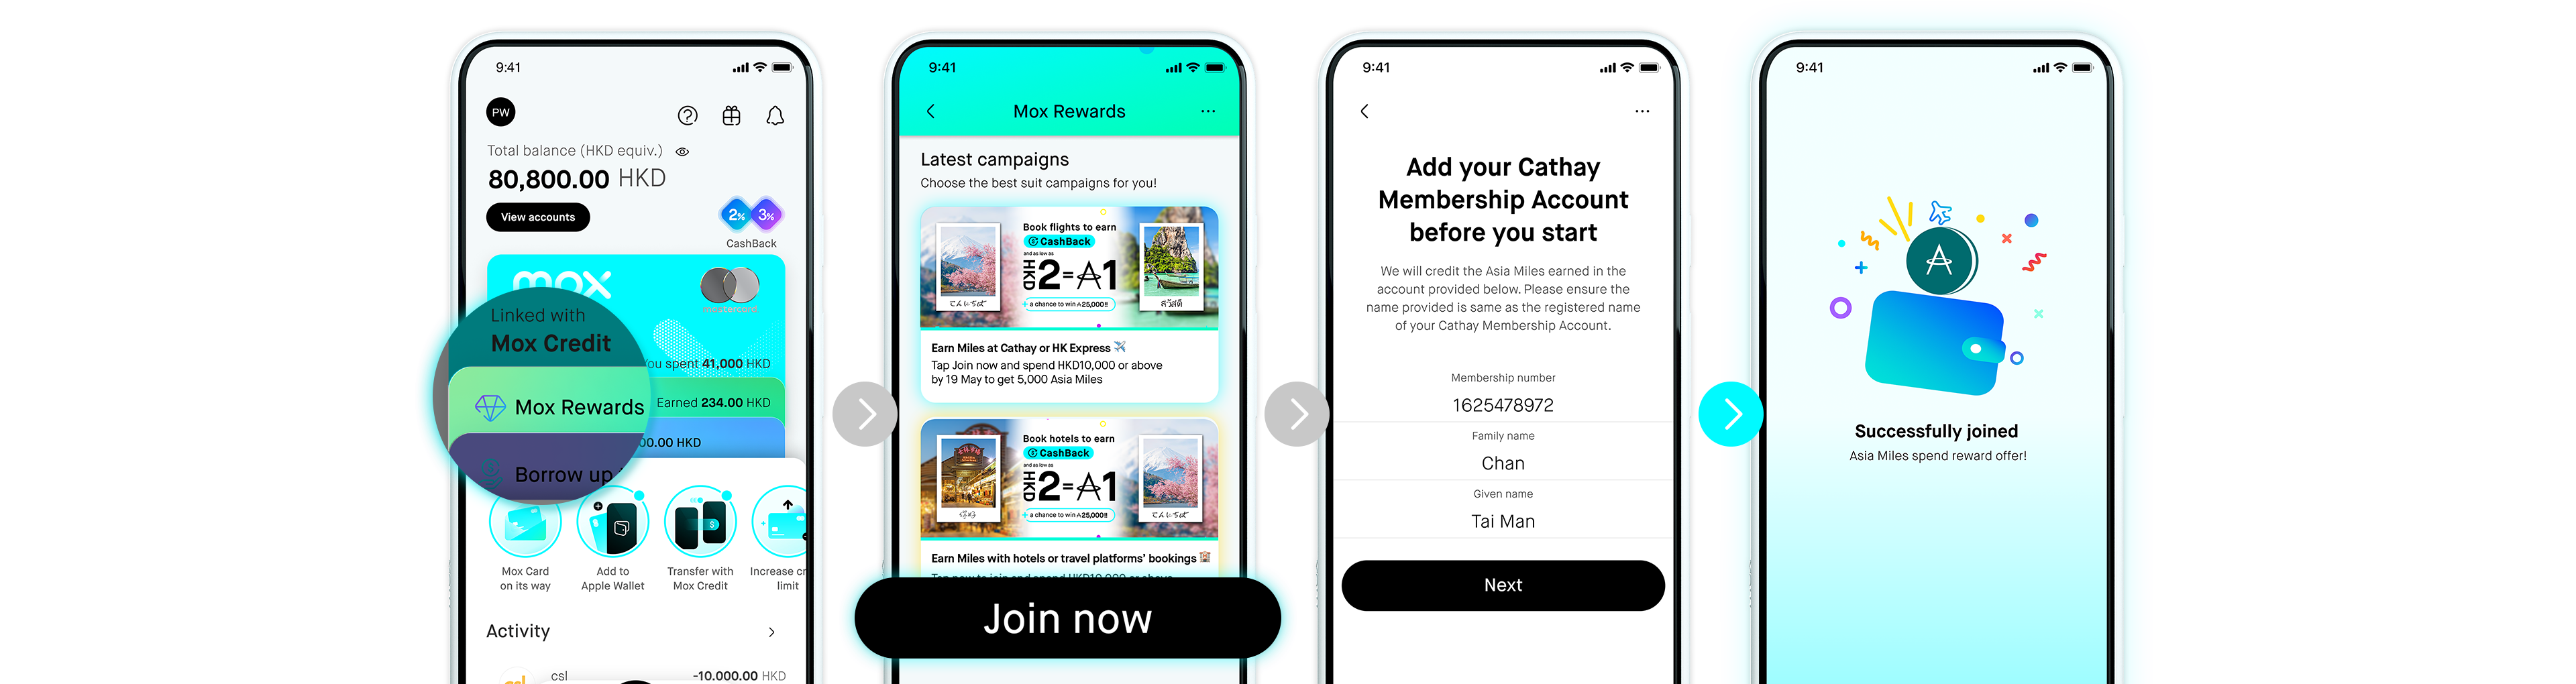 Here’s how you join this promotion and register your Cathay Membership Account